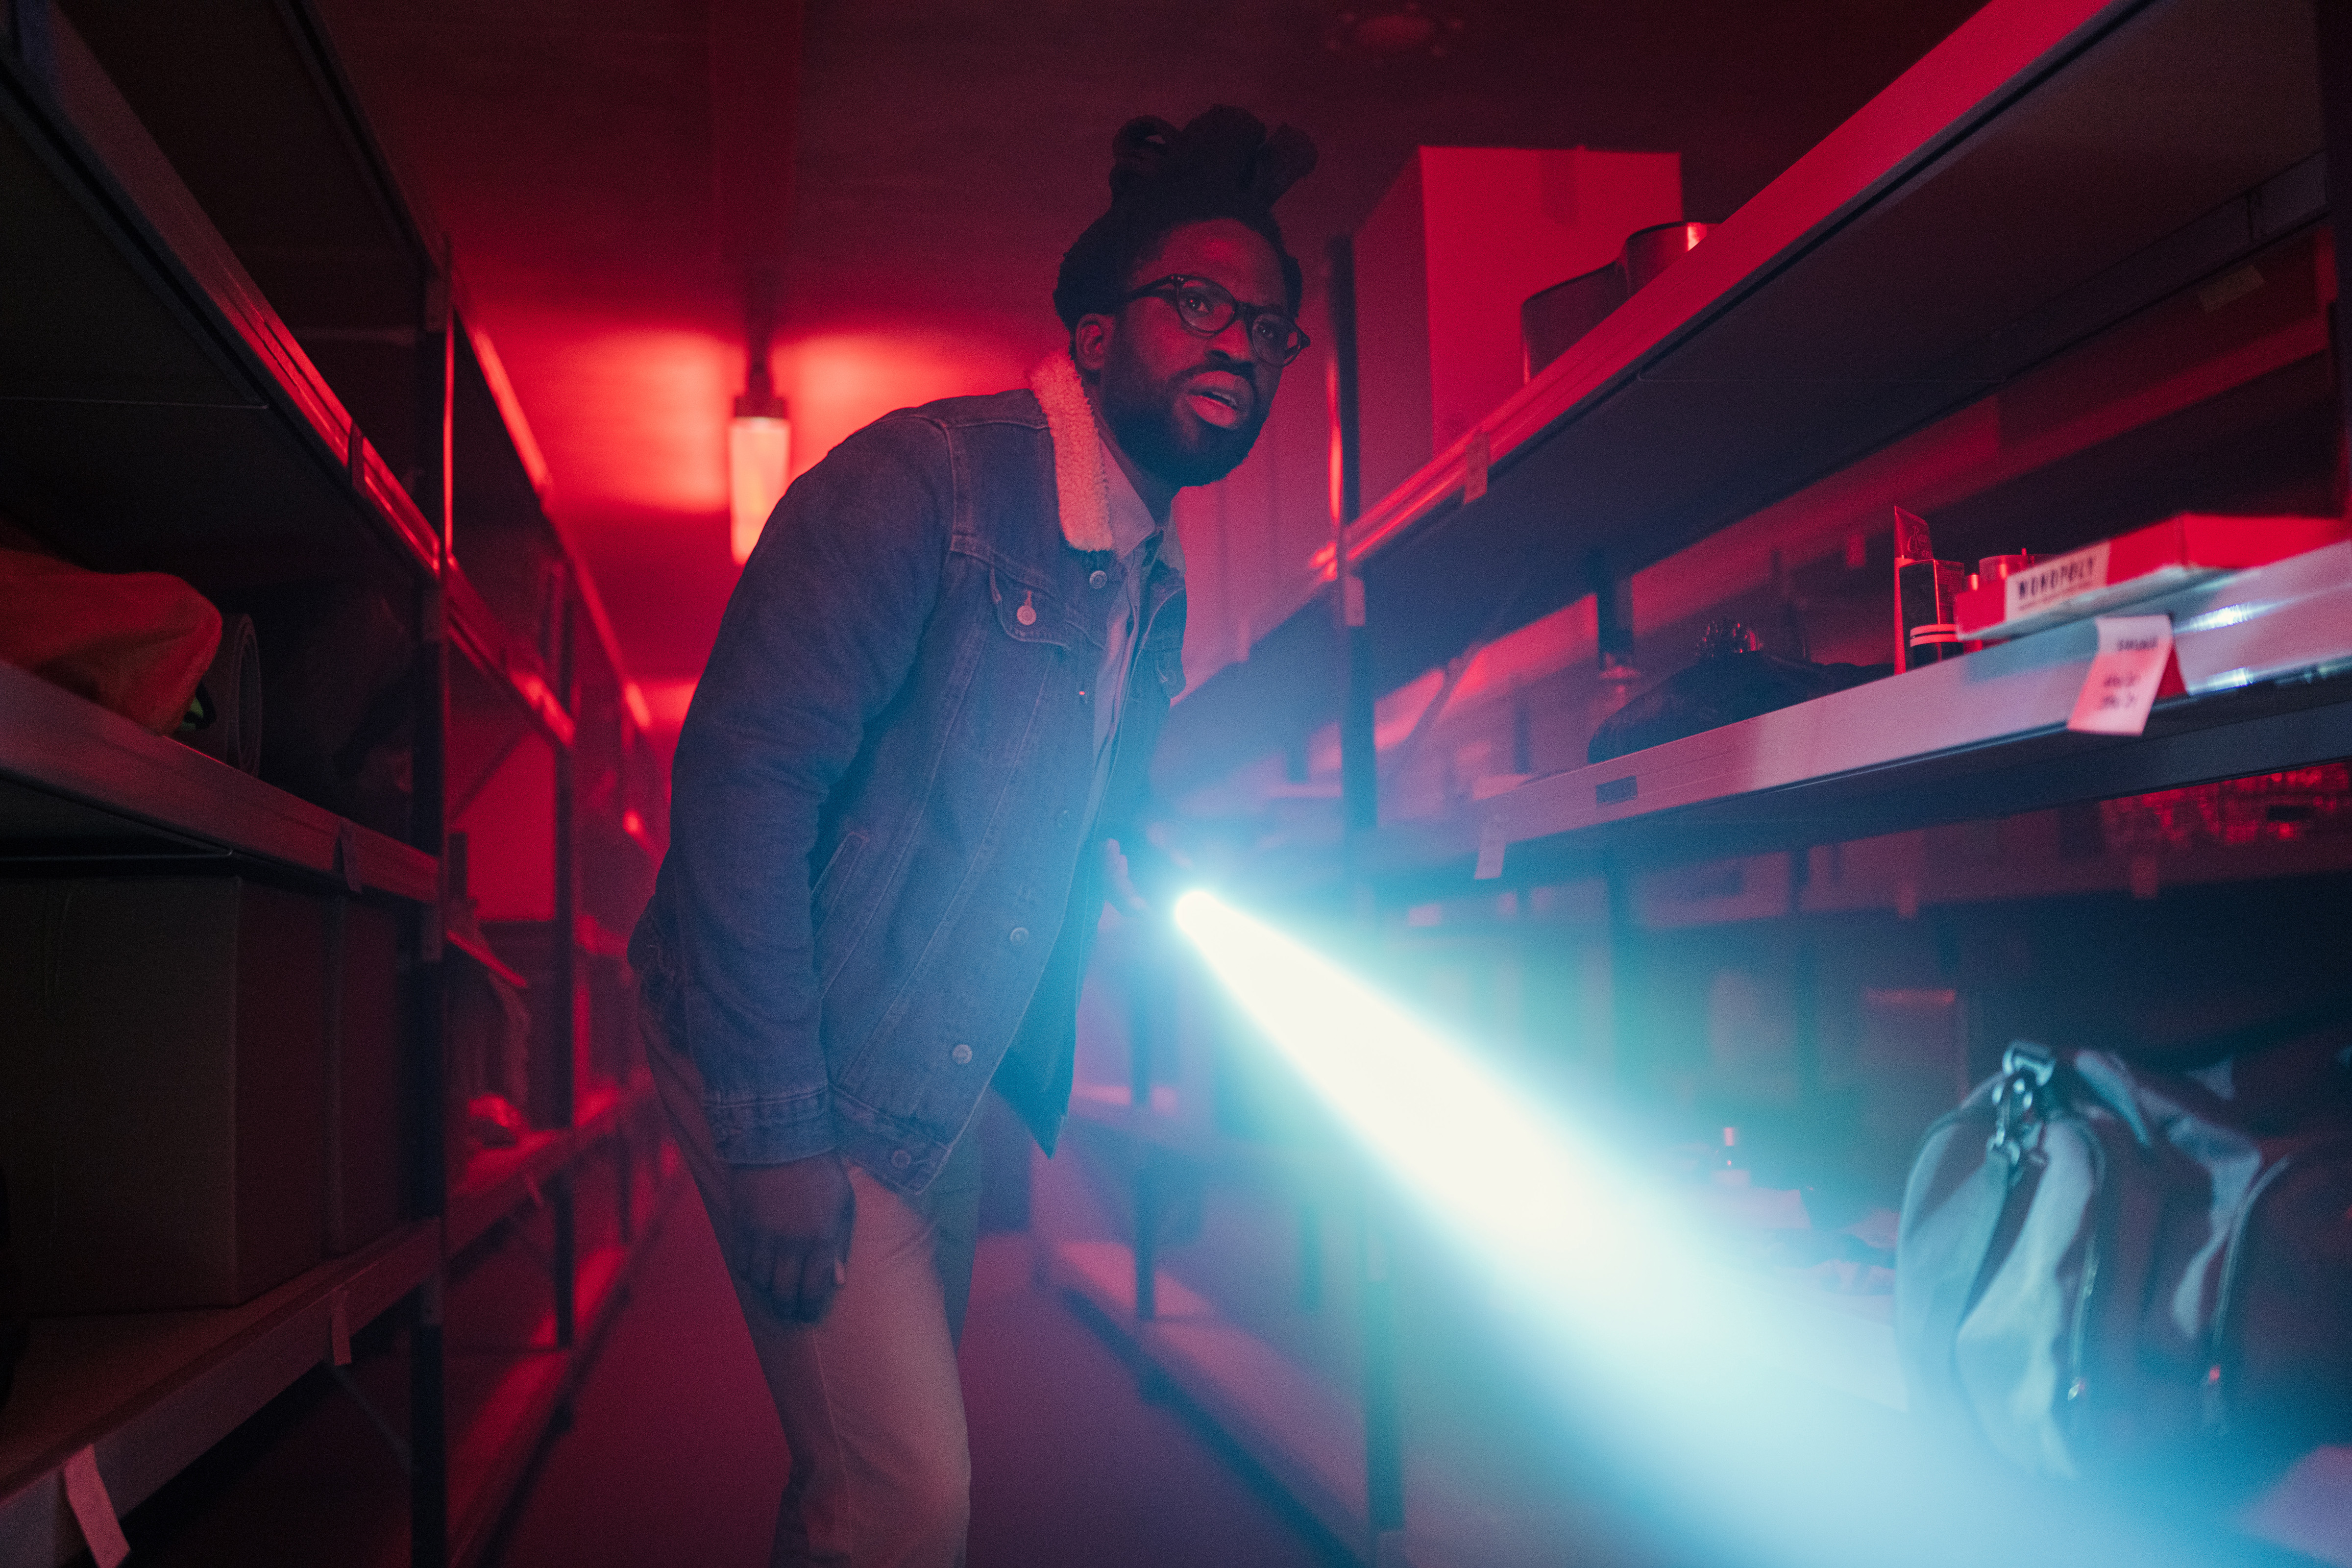 Nick (Adjani Salmon) stands in a storage unit lit by red light, holding a bright torch and looking toward the camera